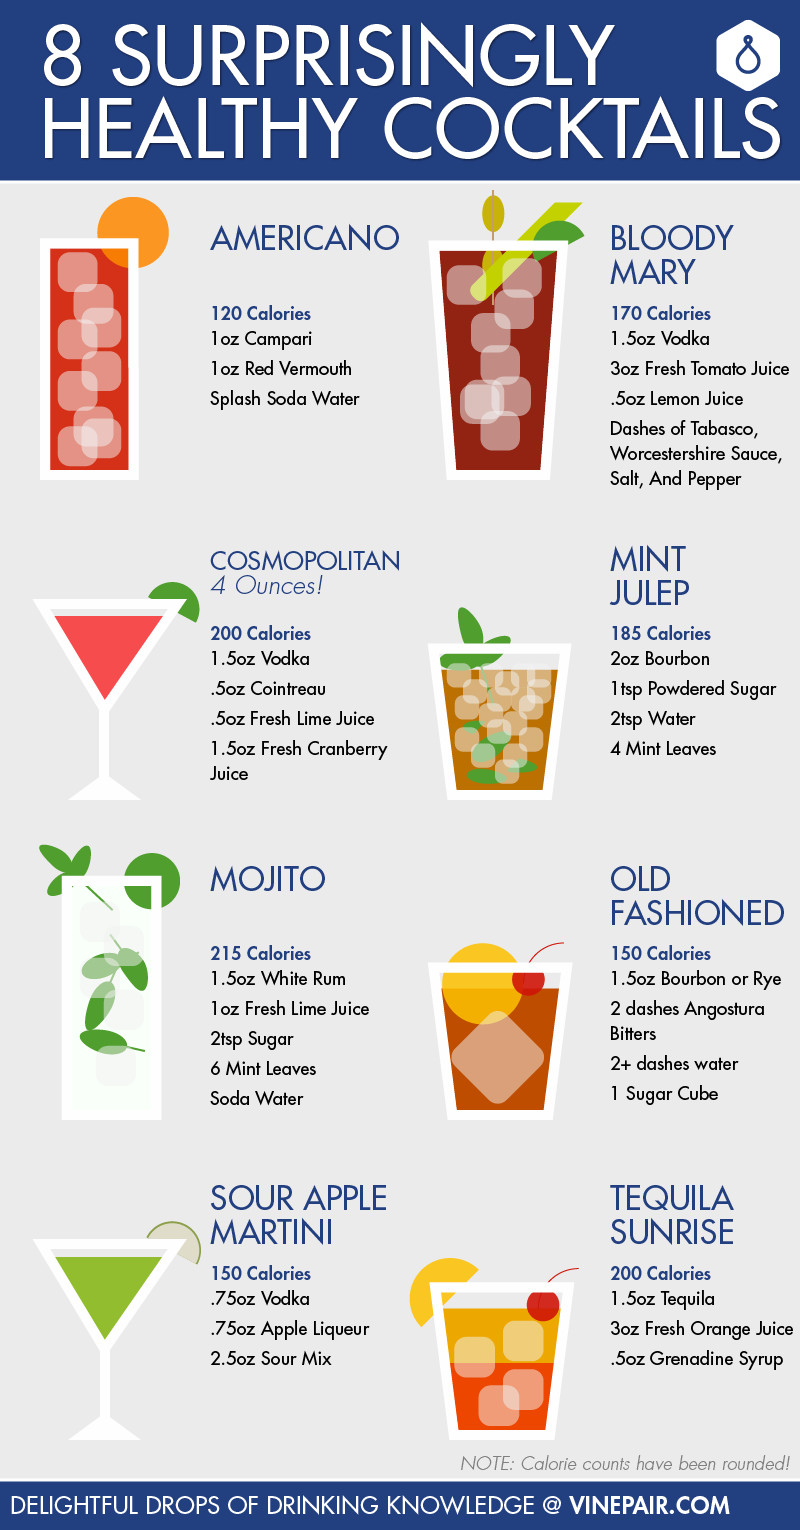 Low Calorie Vodka Drink Recipes
 8 Surprisingly Healthy Cocktail Recipes INFOGRAPHIC